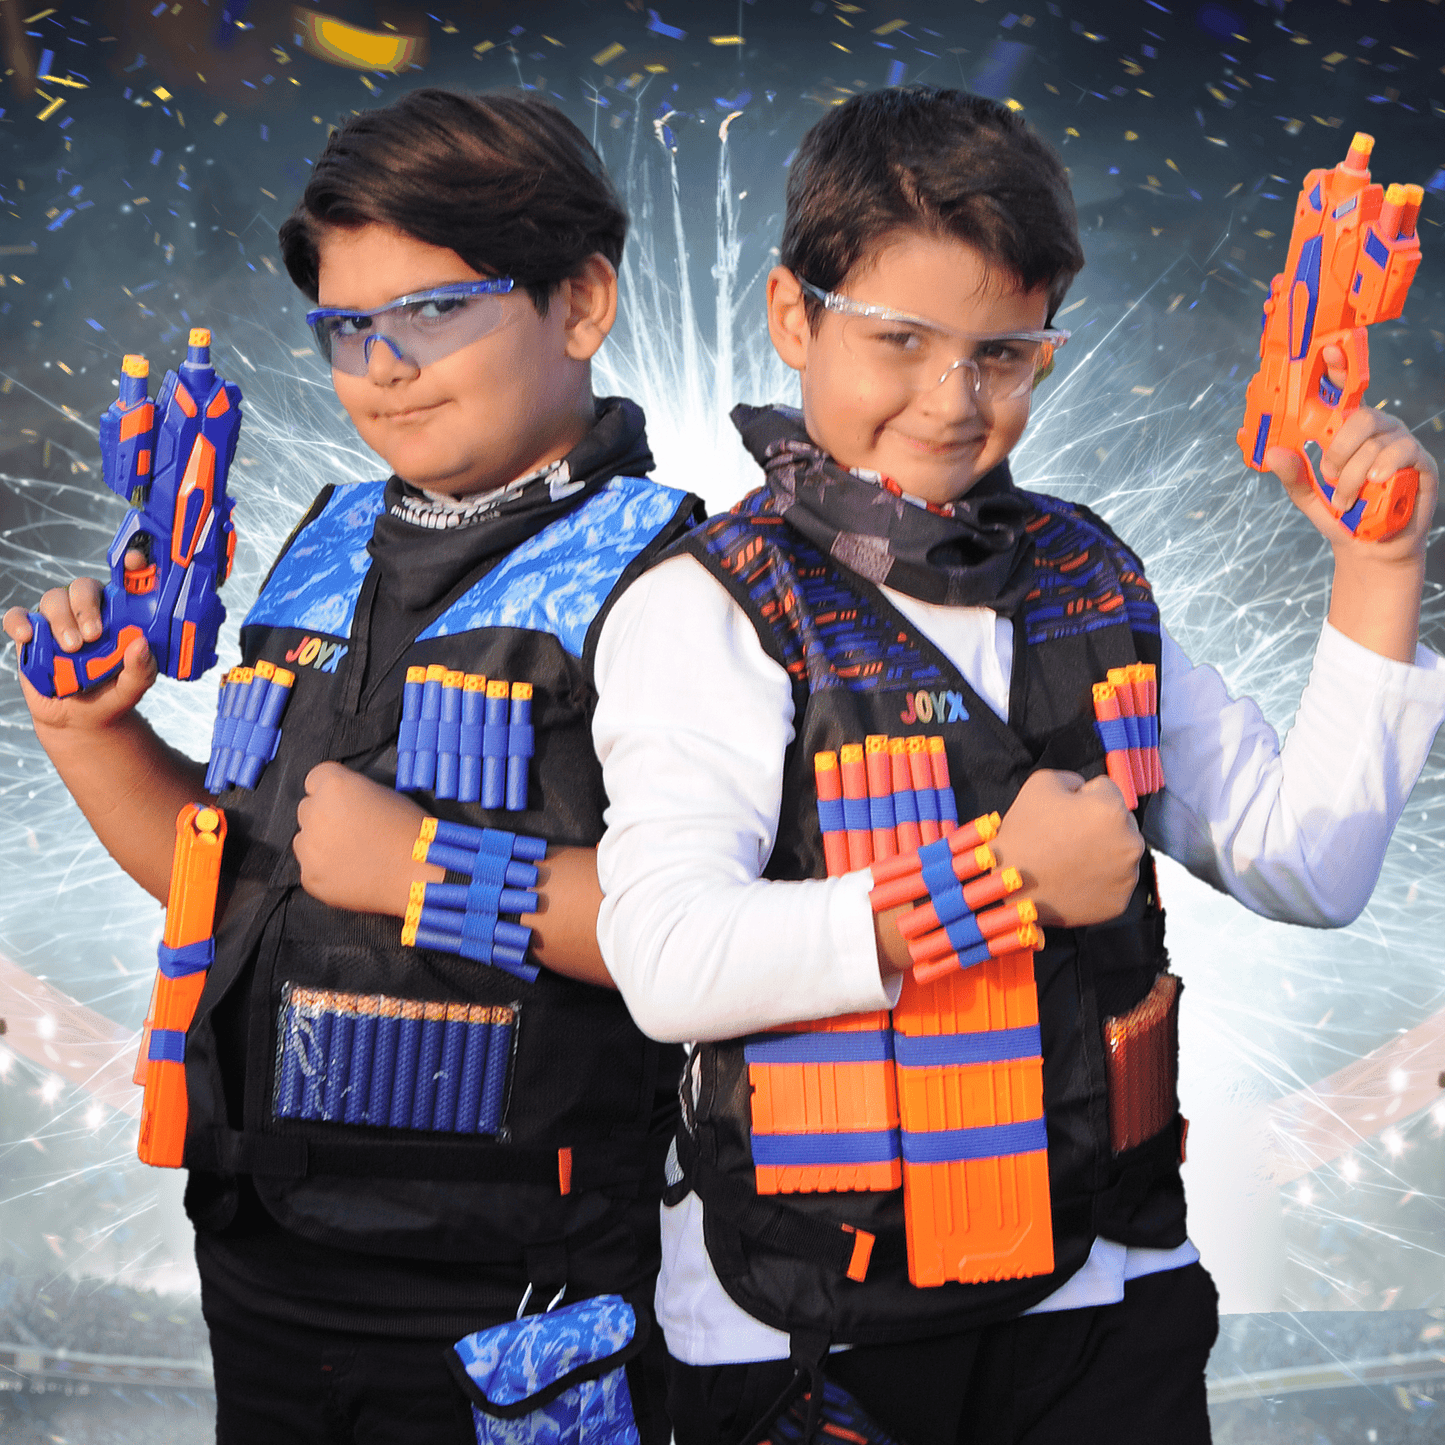 Children smiling and posing with JoyX blaster guns and loaded tactical vests, ready for play, with a dynamic energy burst background.